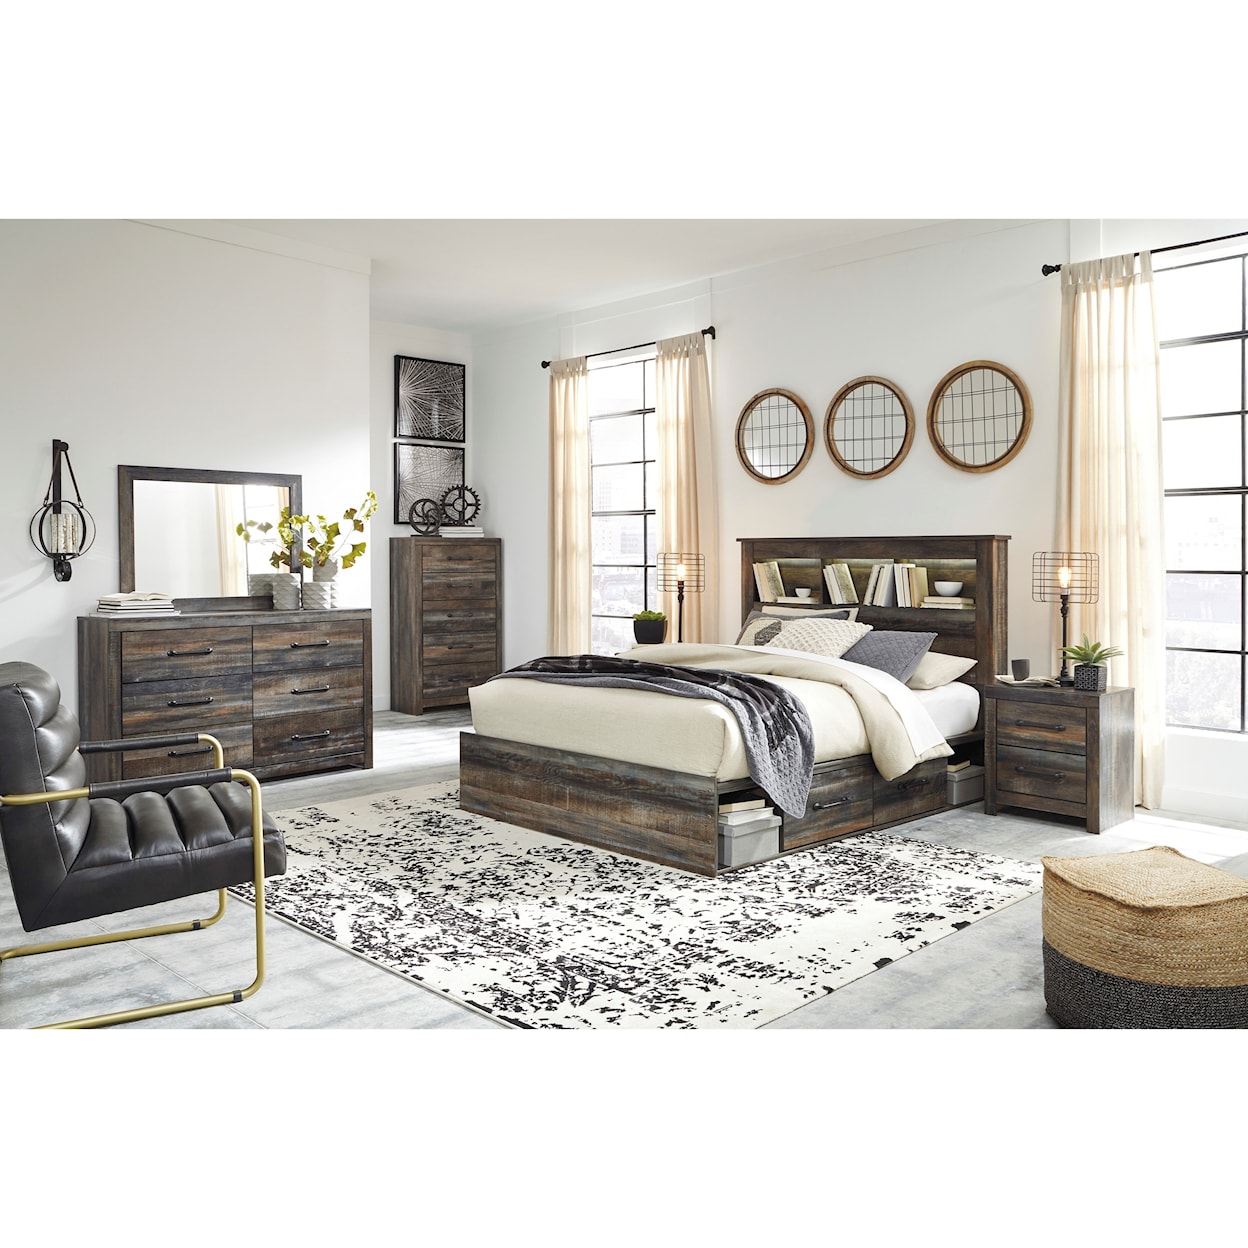 Signature Design by Ashley Drystan 7PC QUEEN BEDROOM GROUP